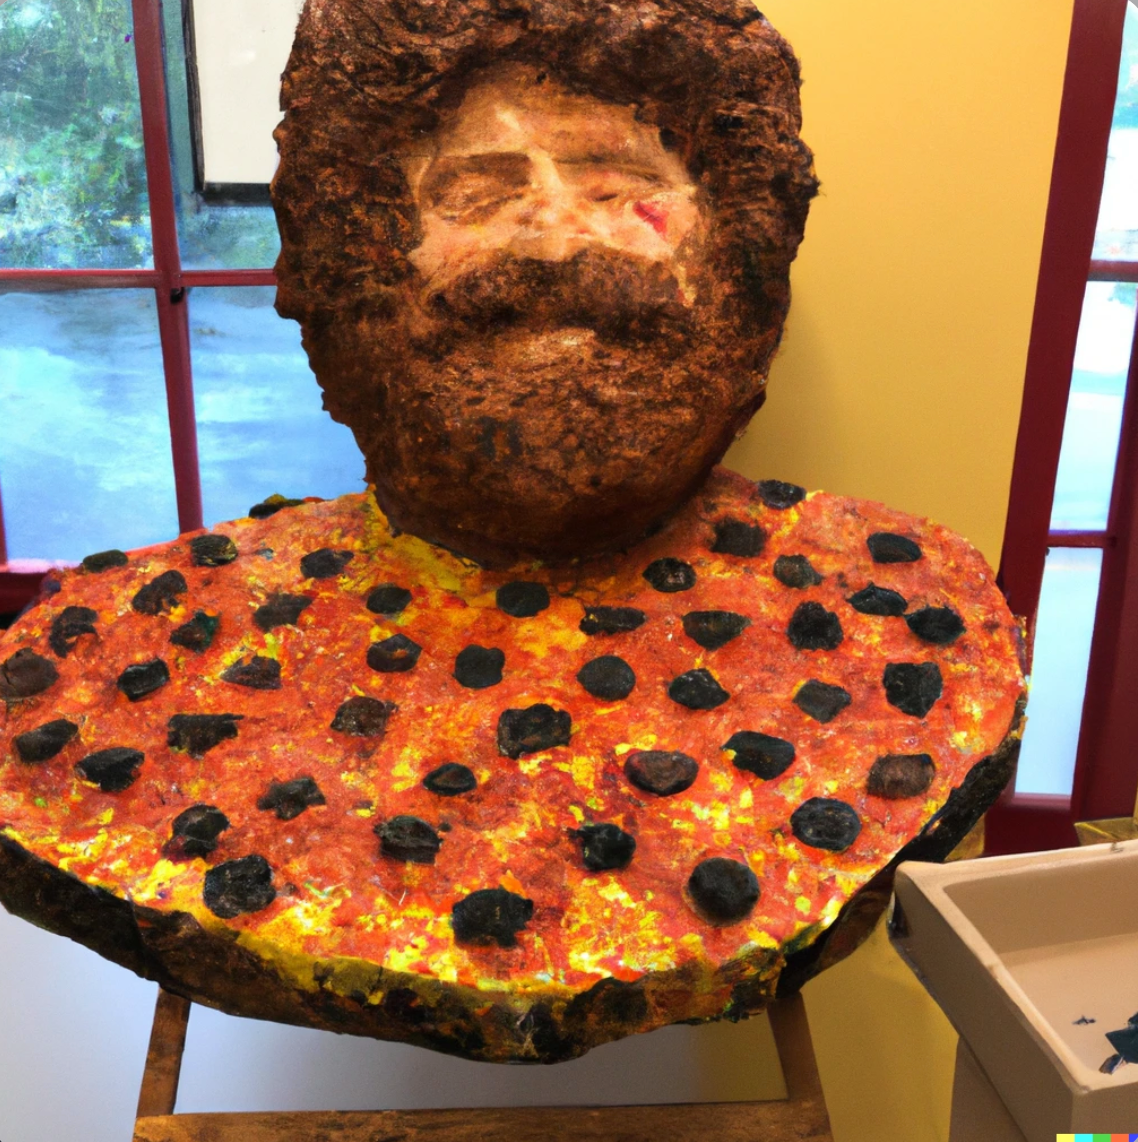 A Statue made out of pizza